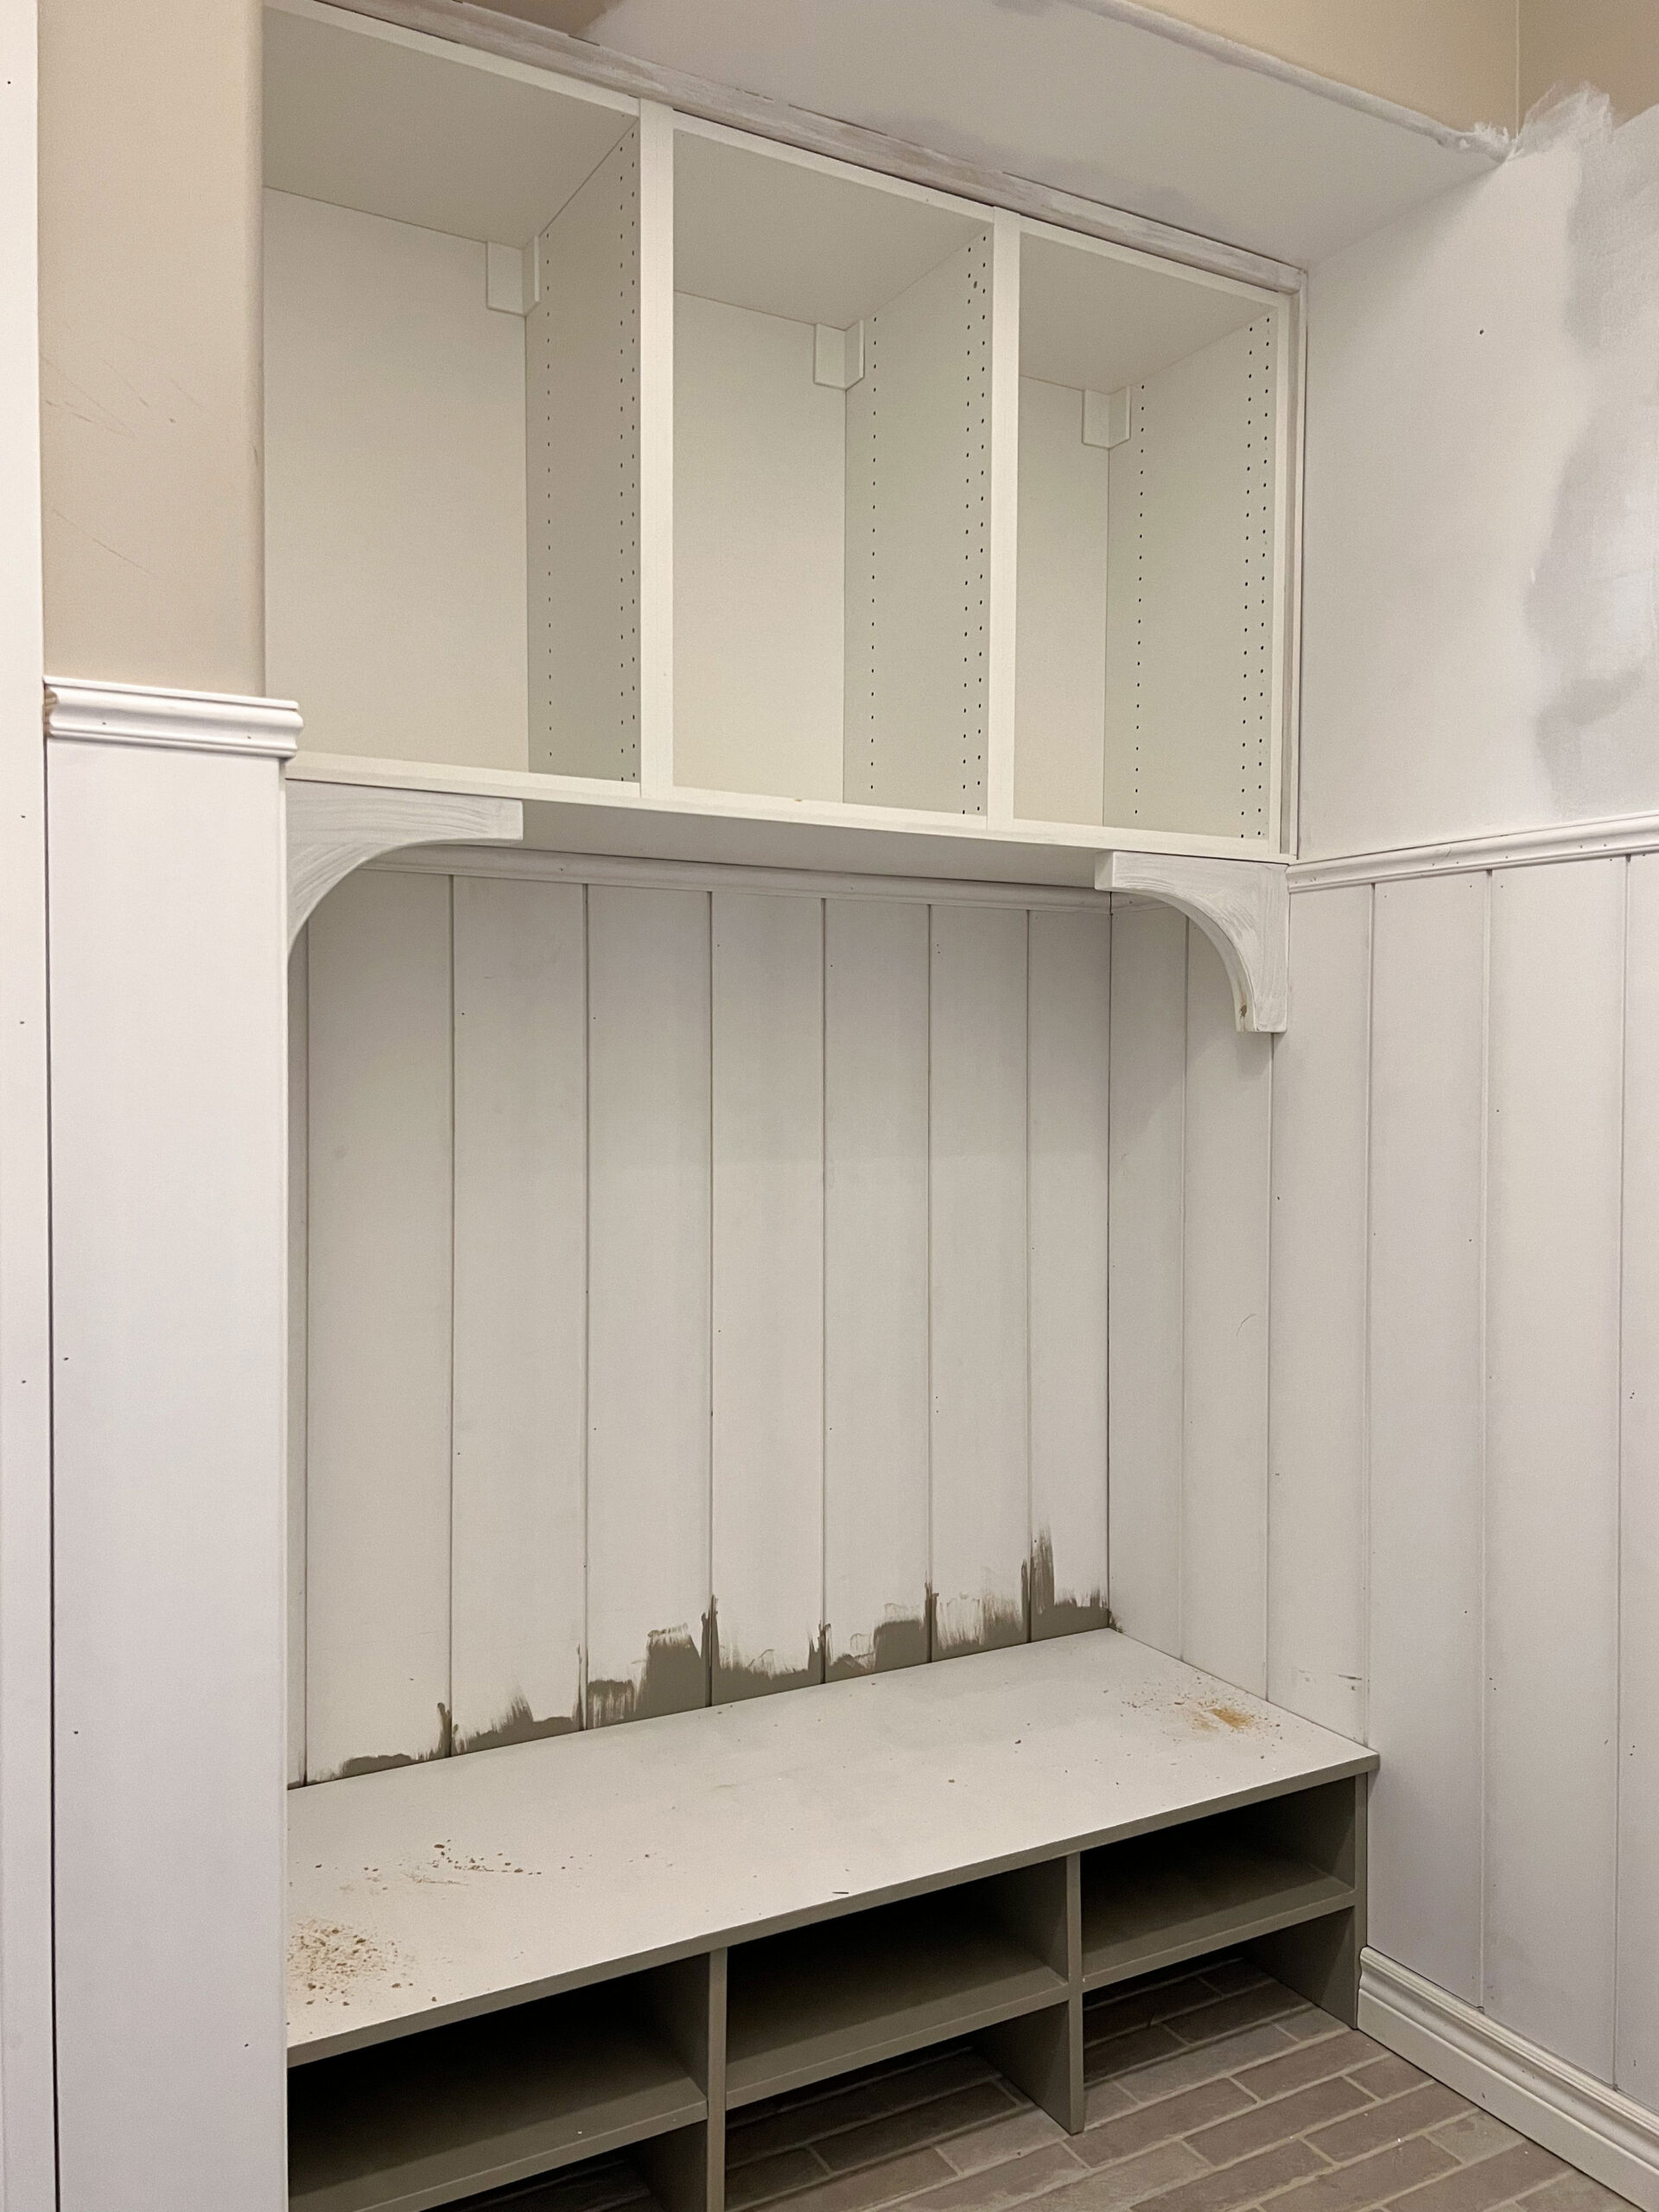 primed mudroom bench with corbels in the corner and shiplap walls, open cabinets above and below